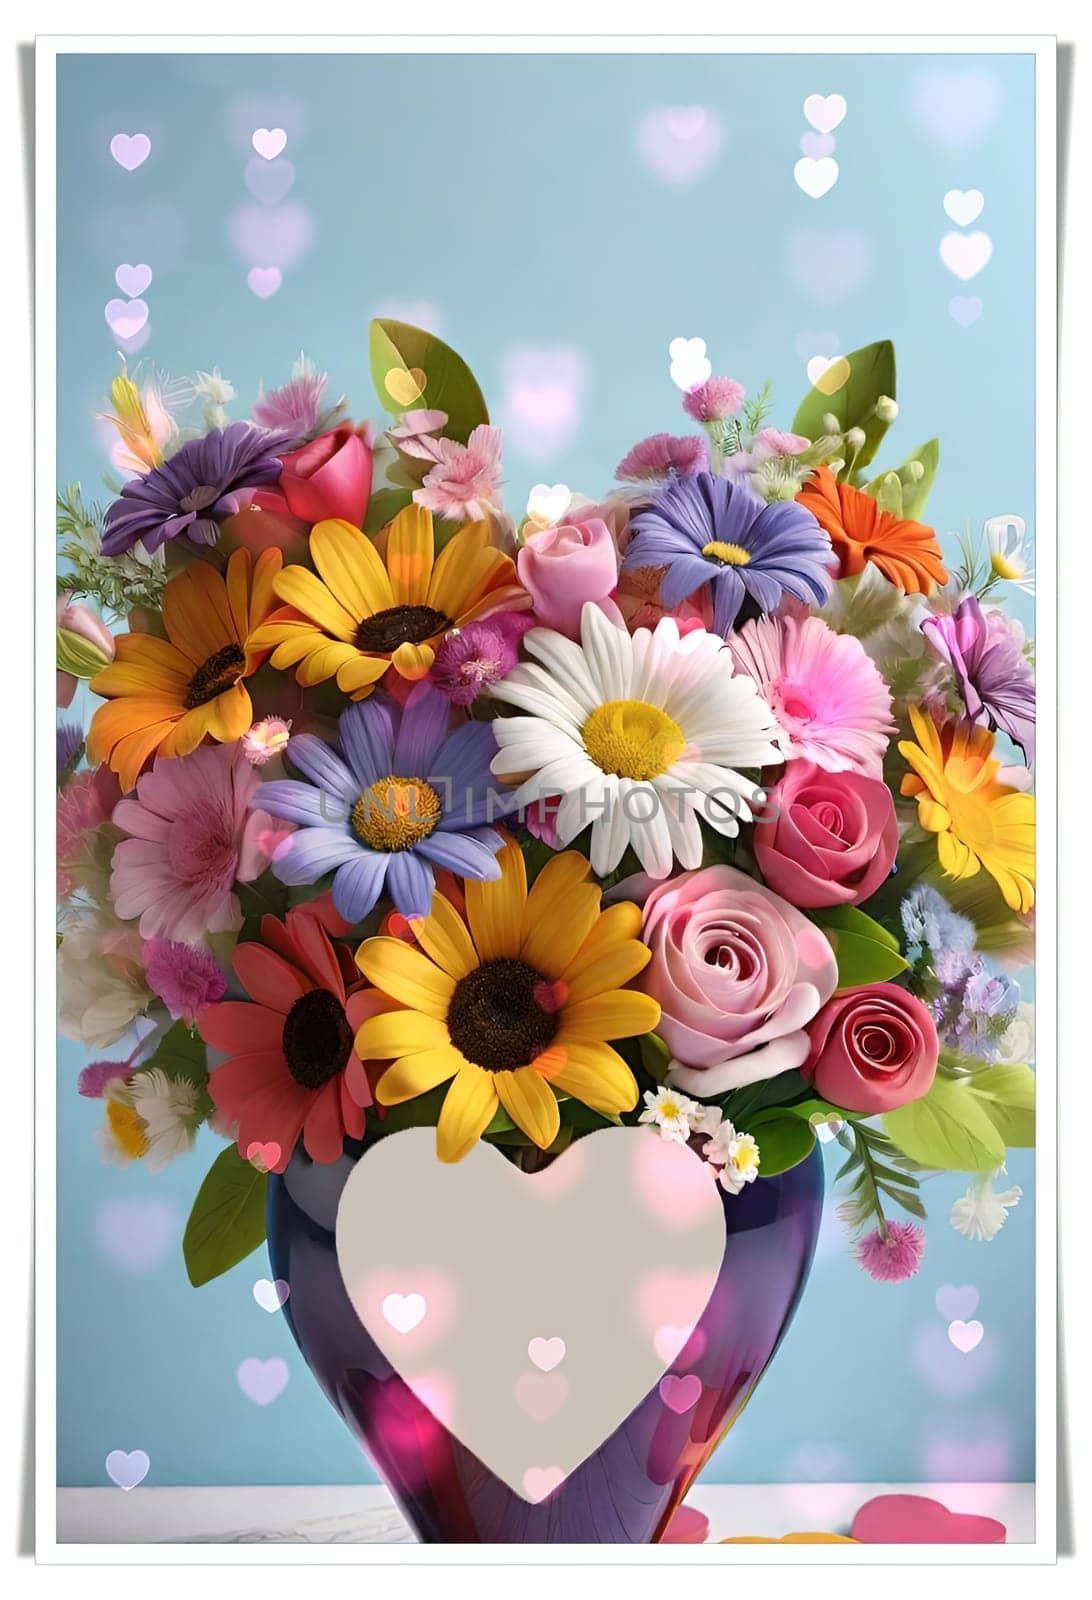 Colorful bouquet of flowers in a vase on background.Bouquet of colorful flowers in a vase with a heart.Bouquet of colorful flowers with a heart on a background.Bouquet of colorful flowers with heart shaped frame on background.Valentines day card.